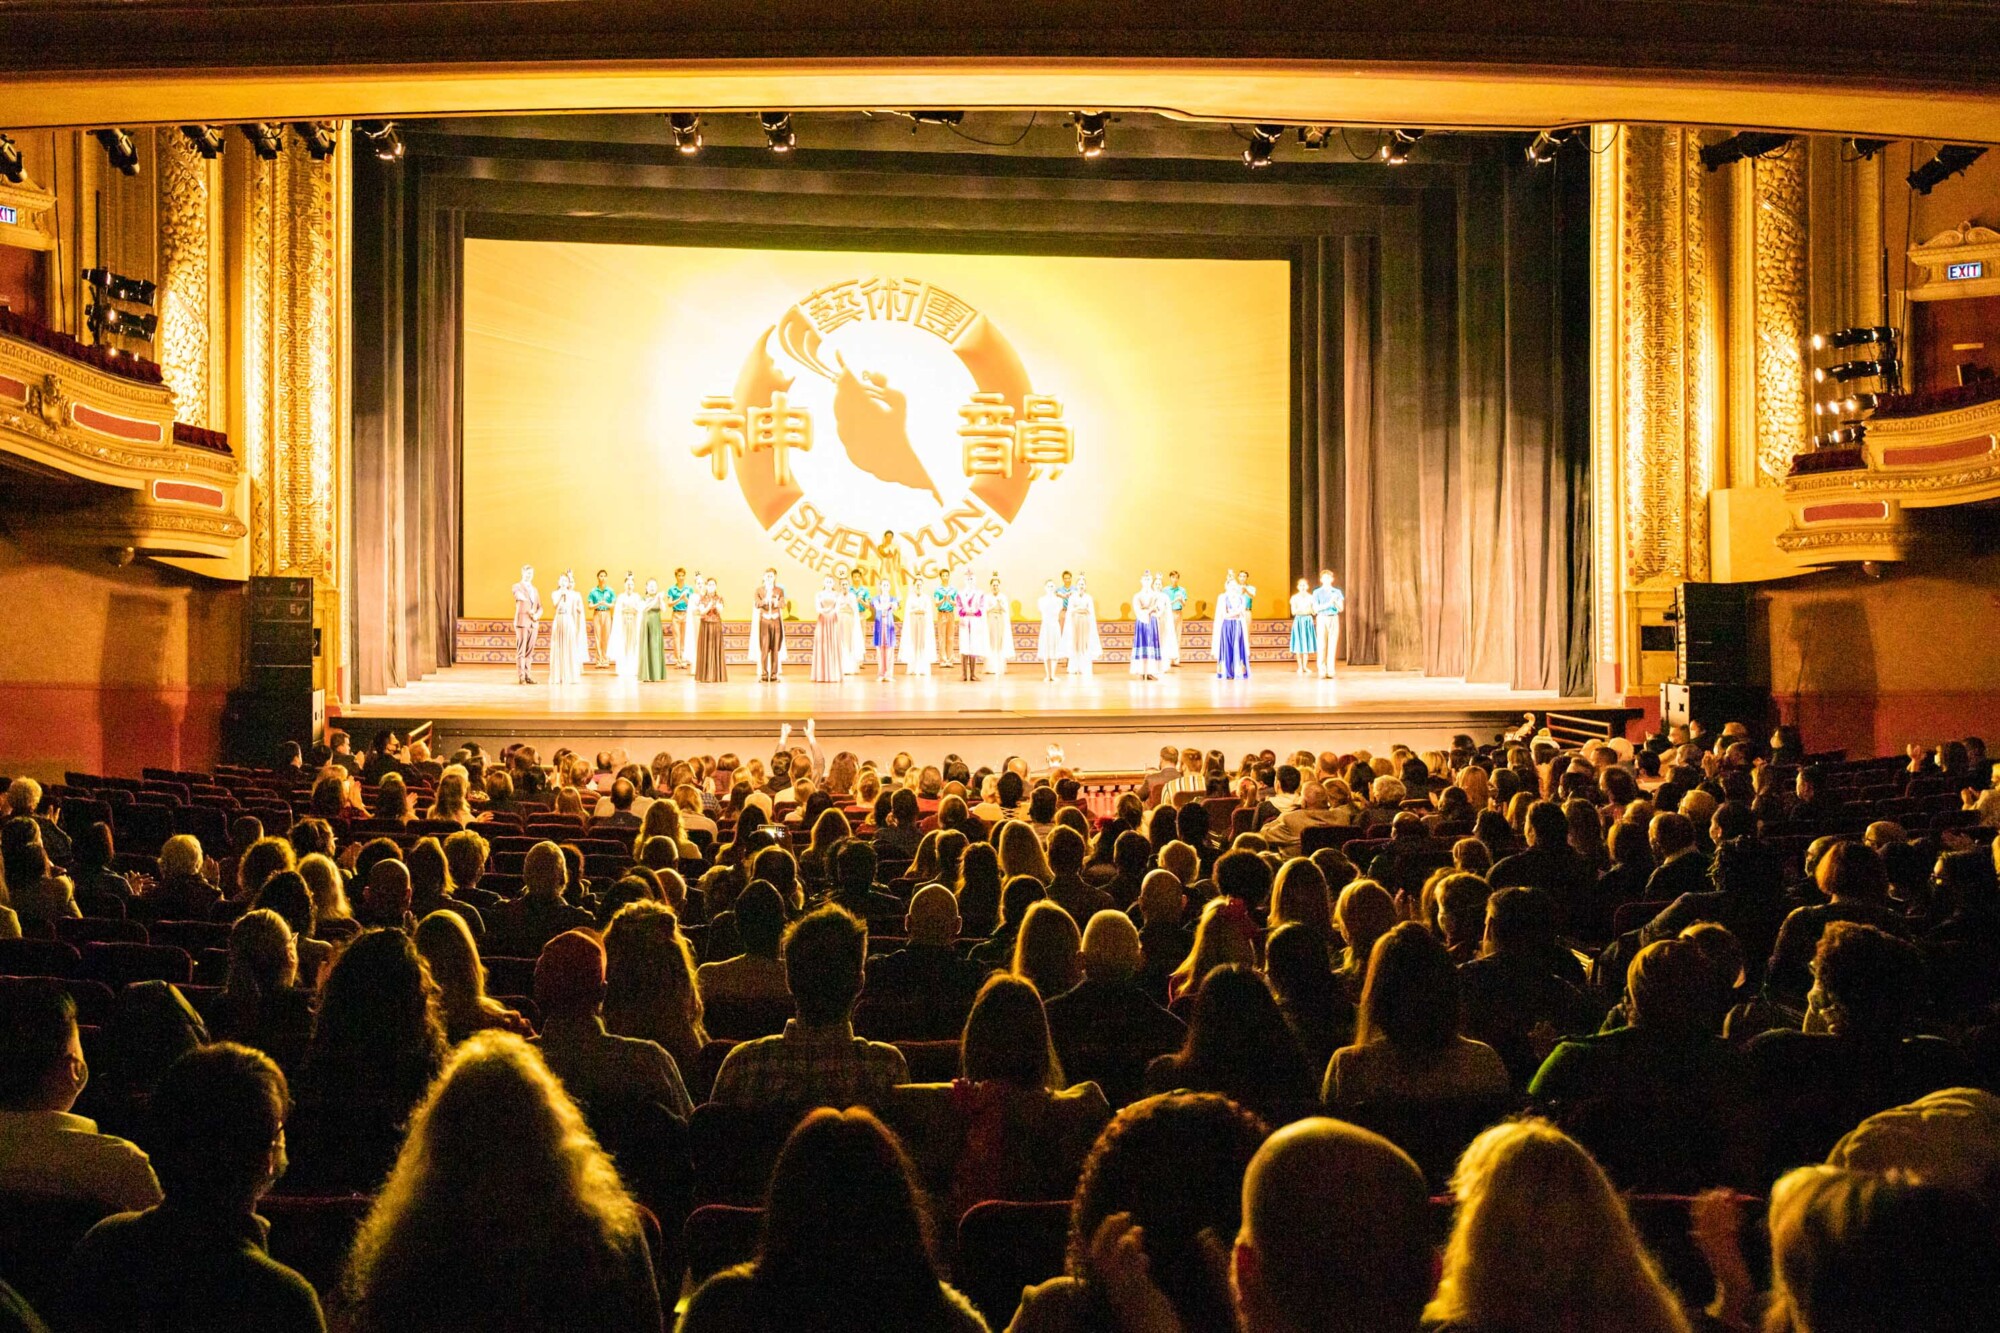 Shen Yun's Mysterious Rejuvenating Effects